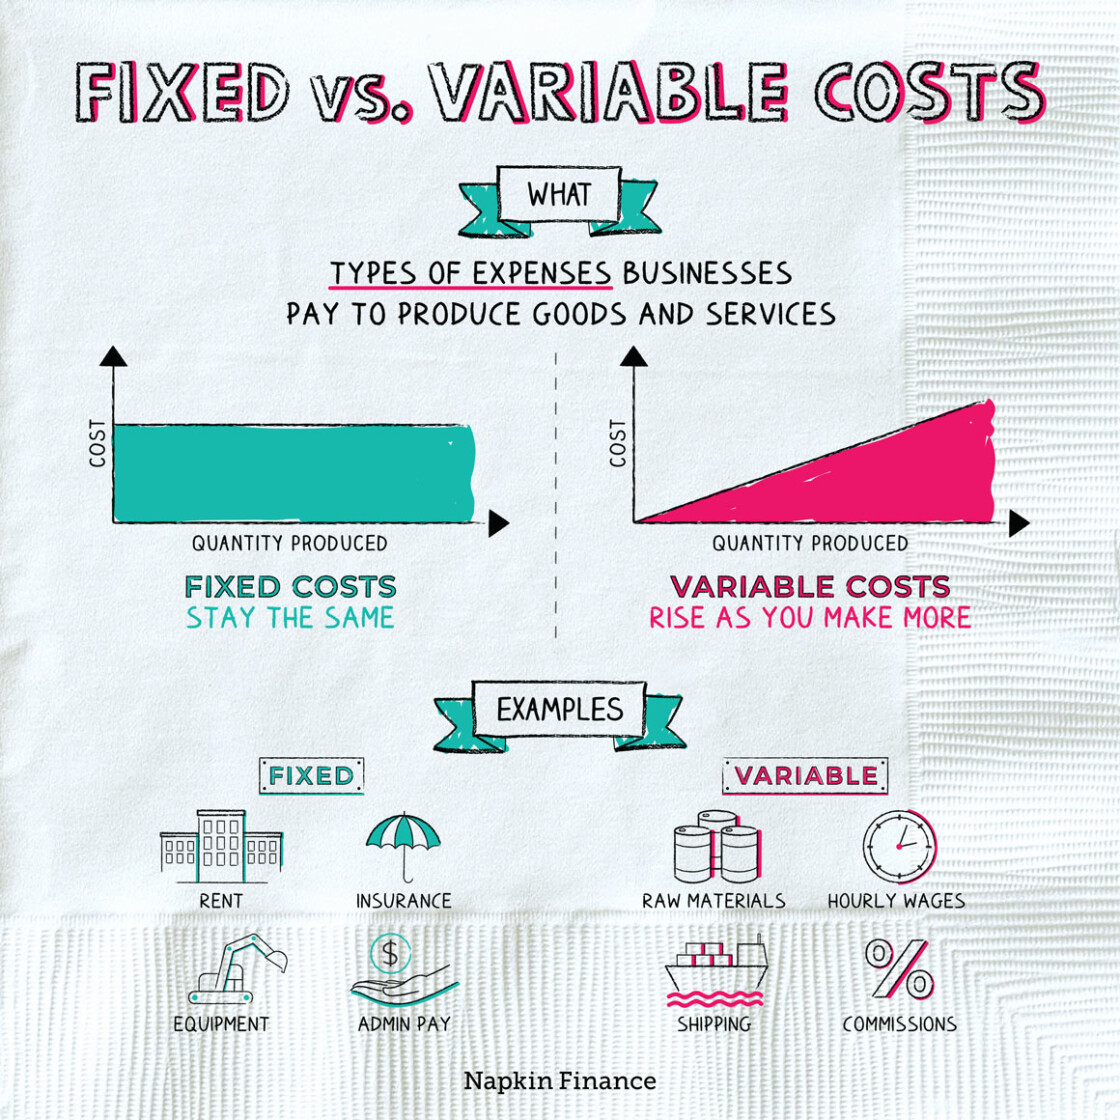 Fixed vs Variable Costs